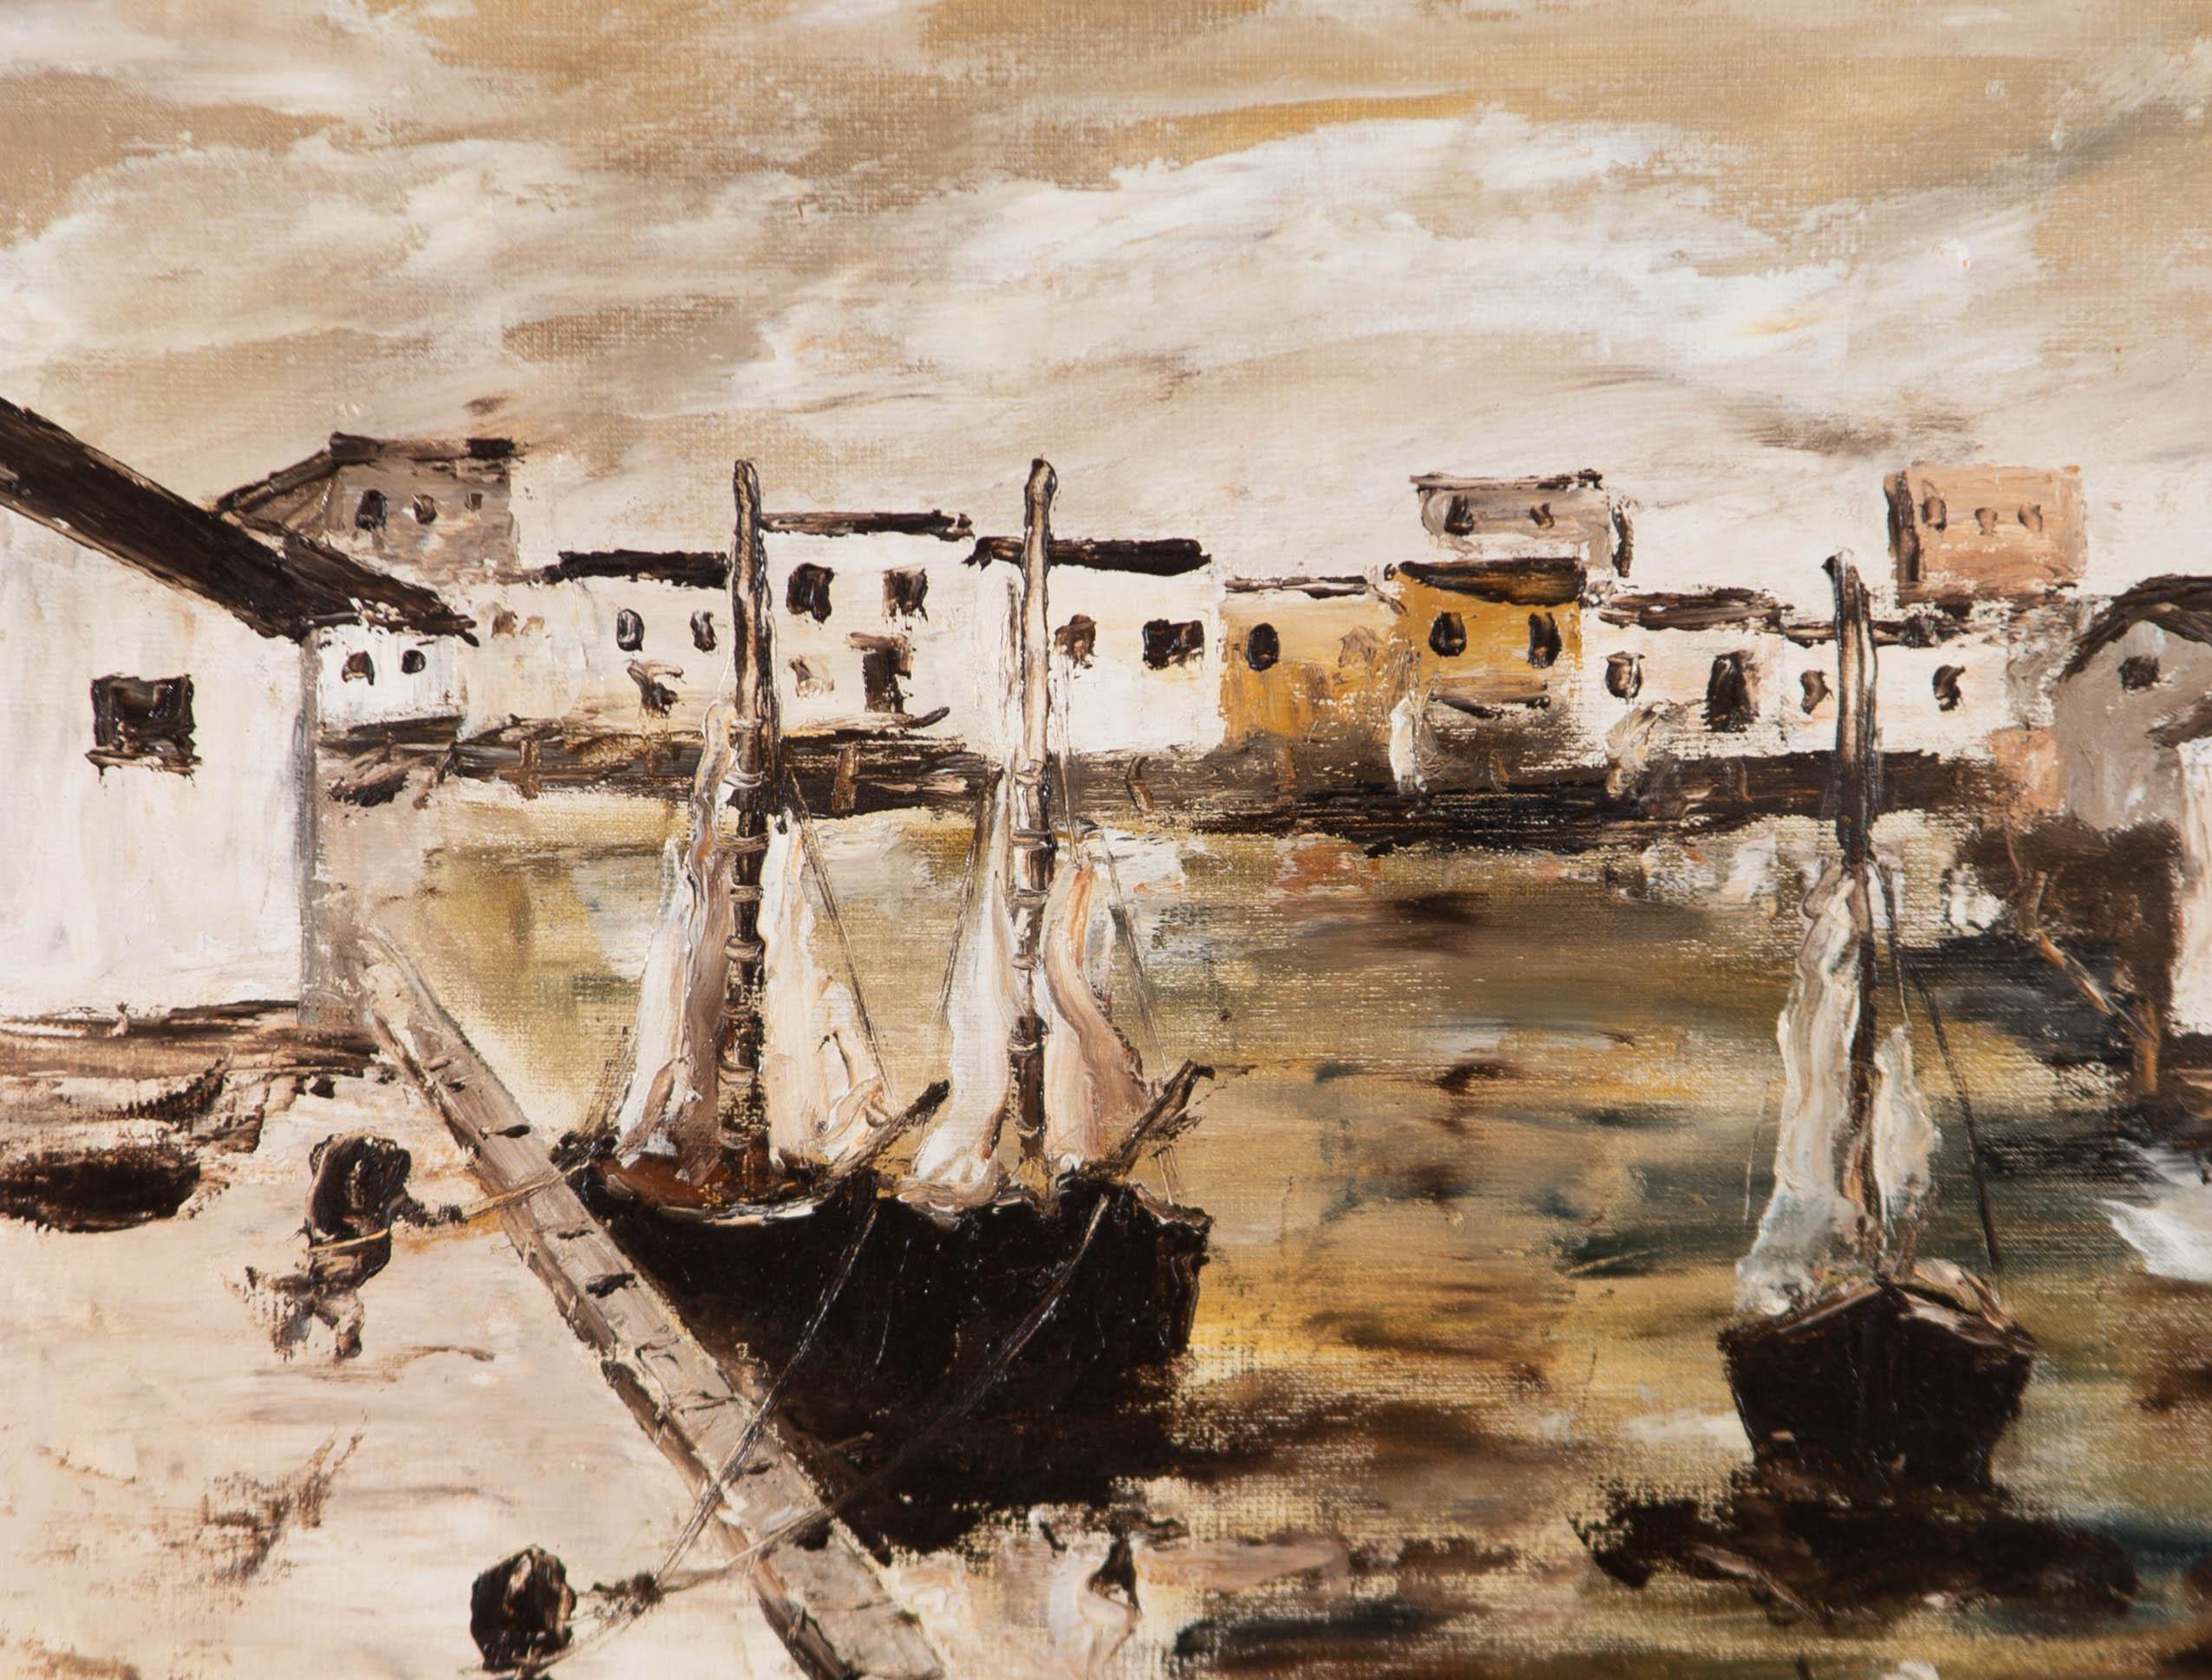 Contemporary Oil - Town View with Docked Boats - Brown Figurative Painting by Unknown